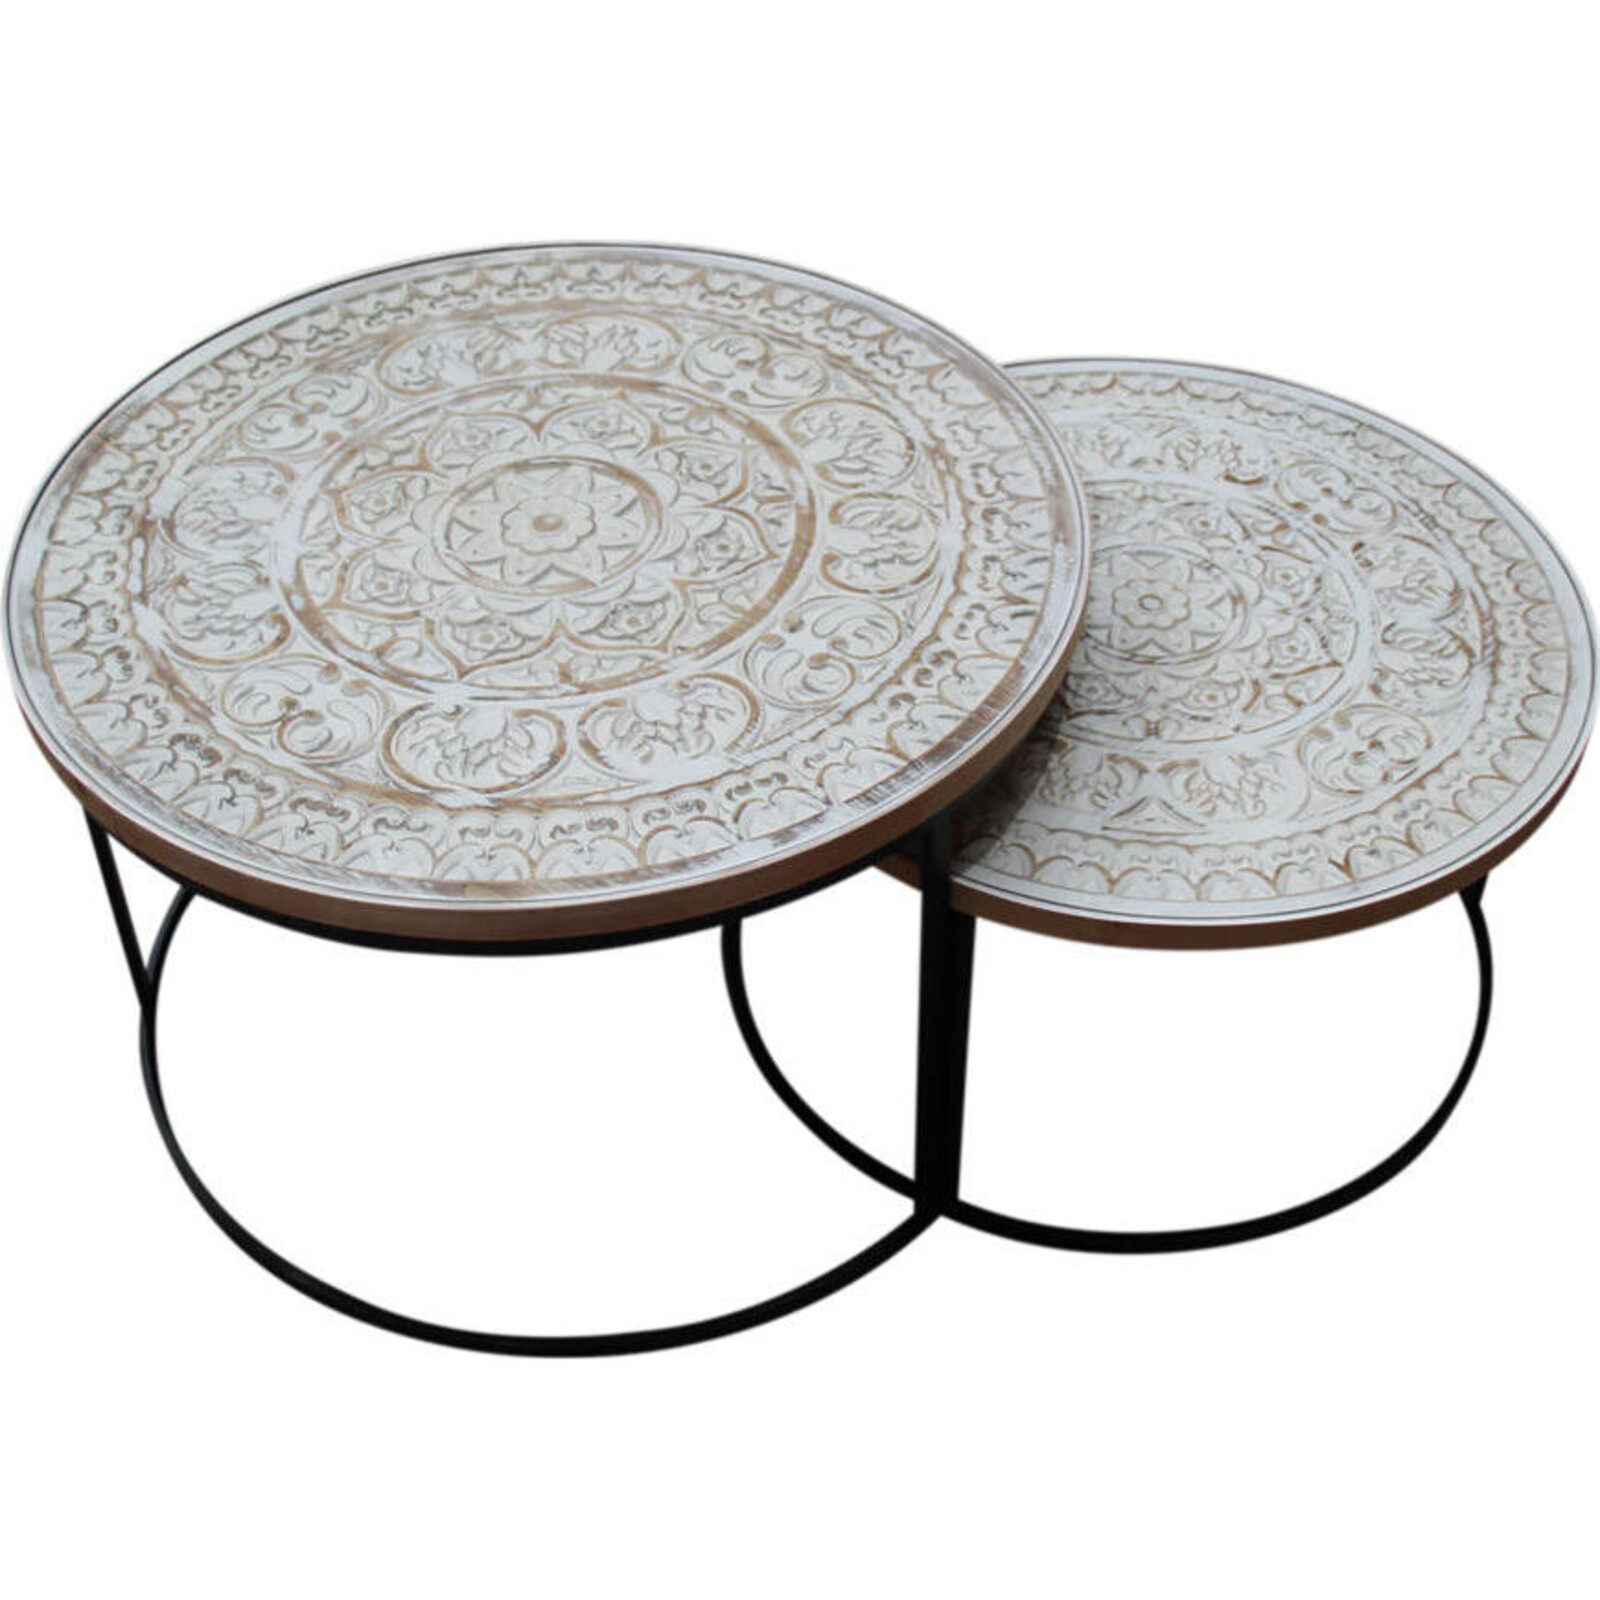 # Round Tables Natural/White S/2